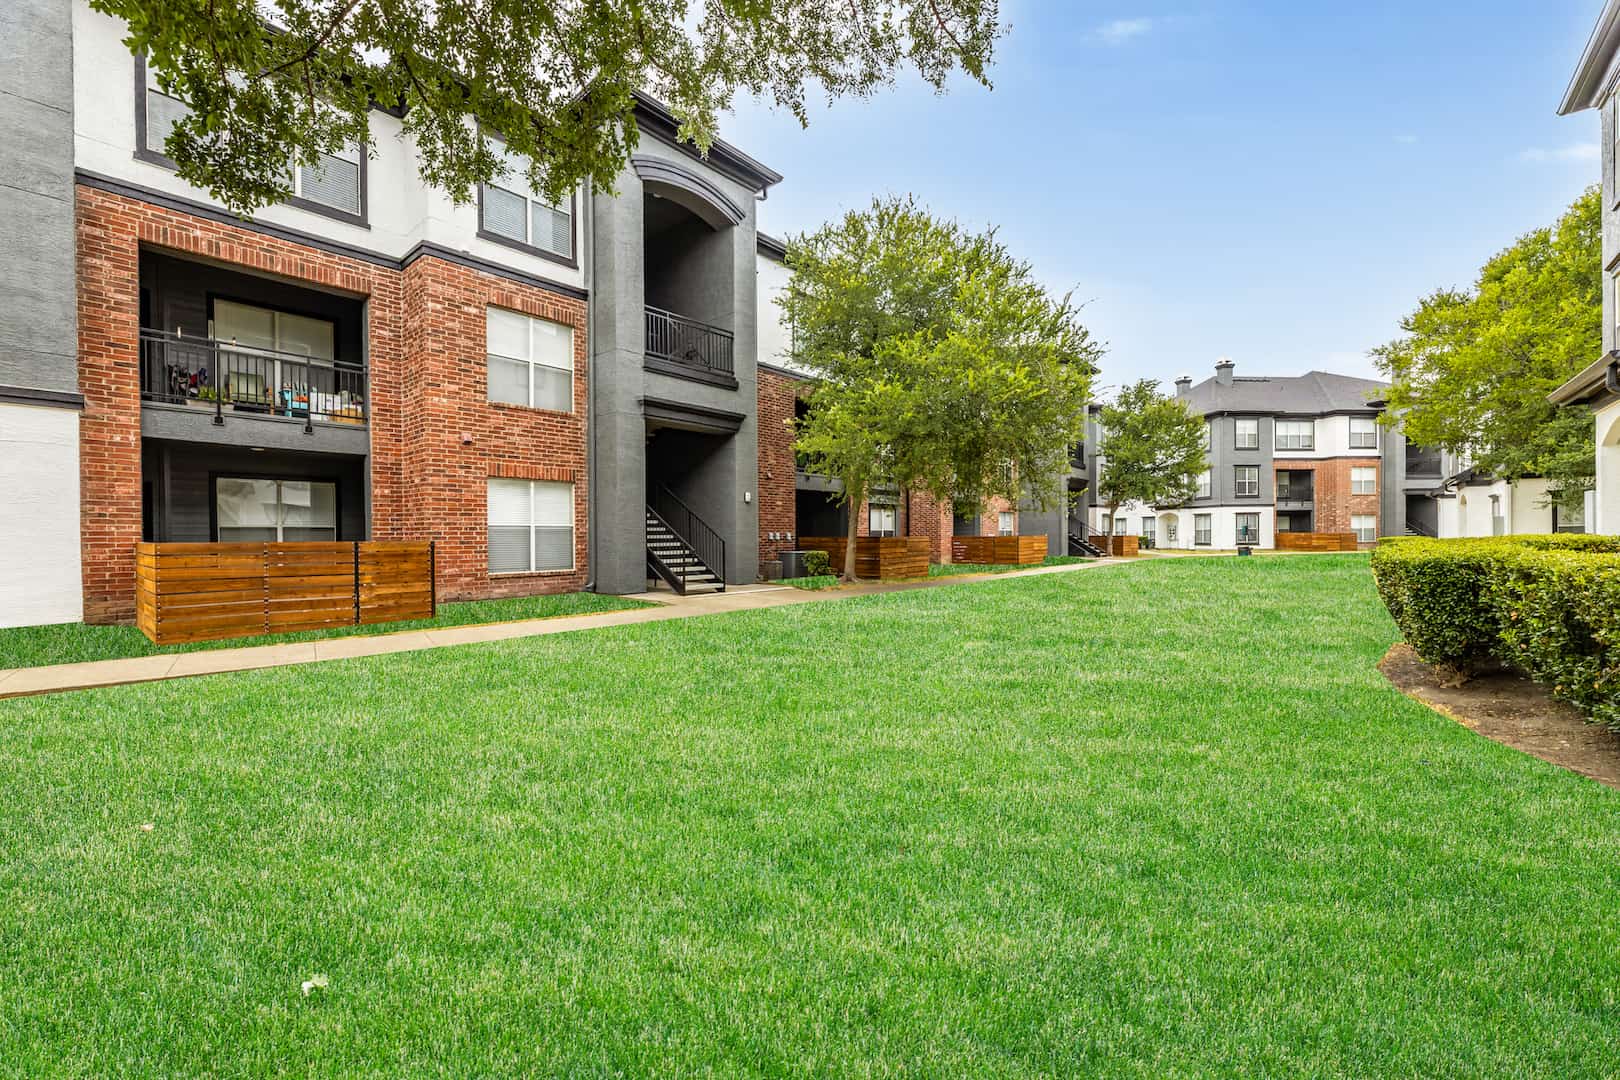 green grassy areas with trees surrounding apartments